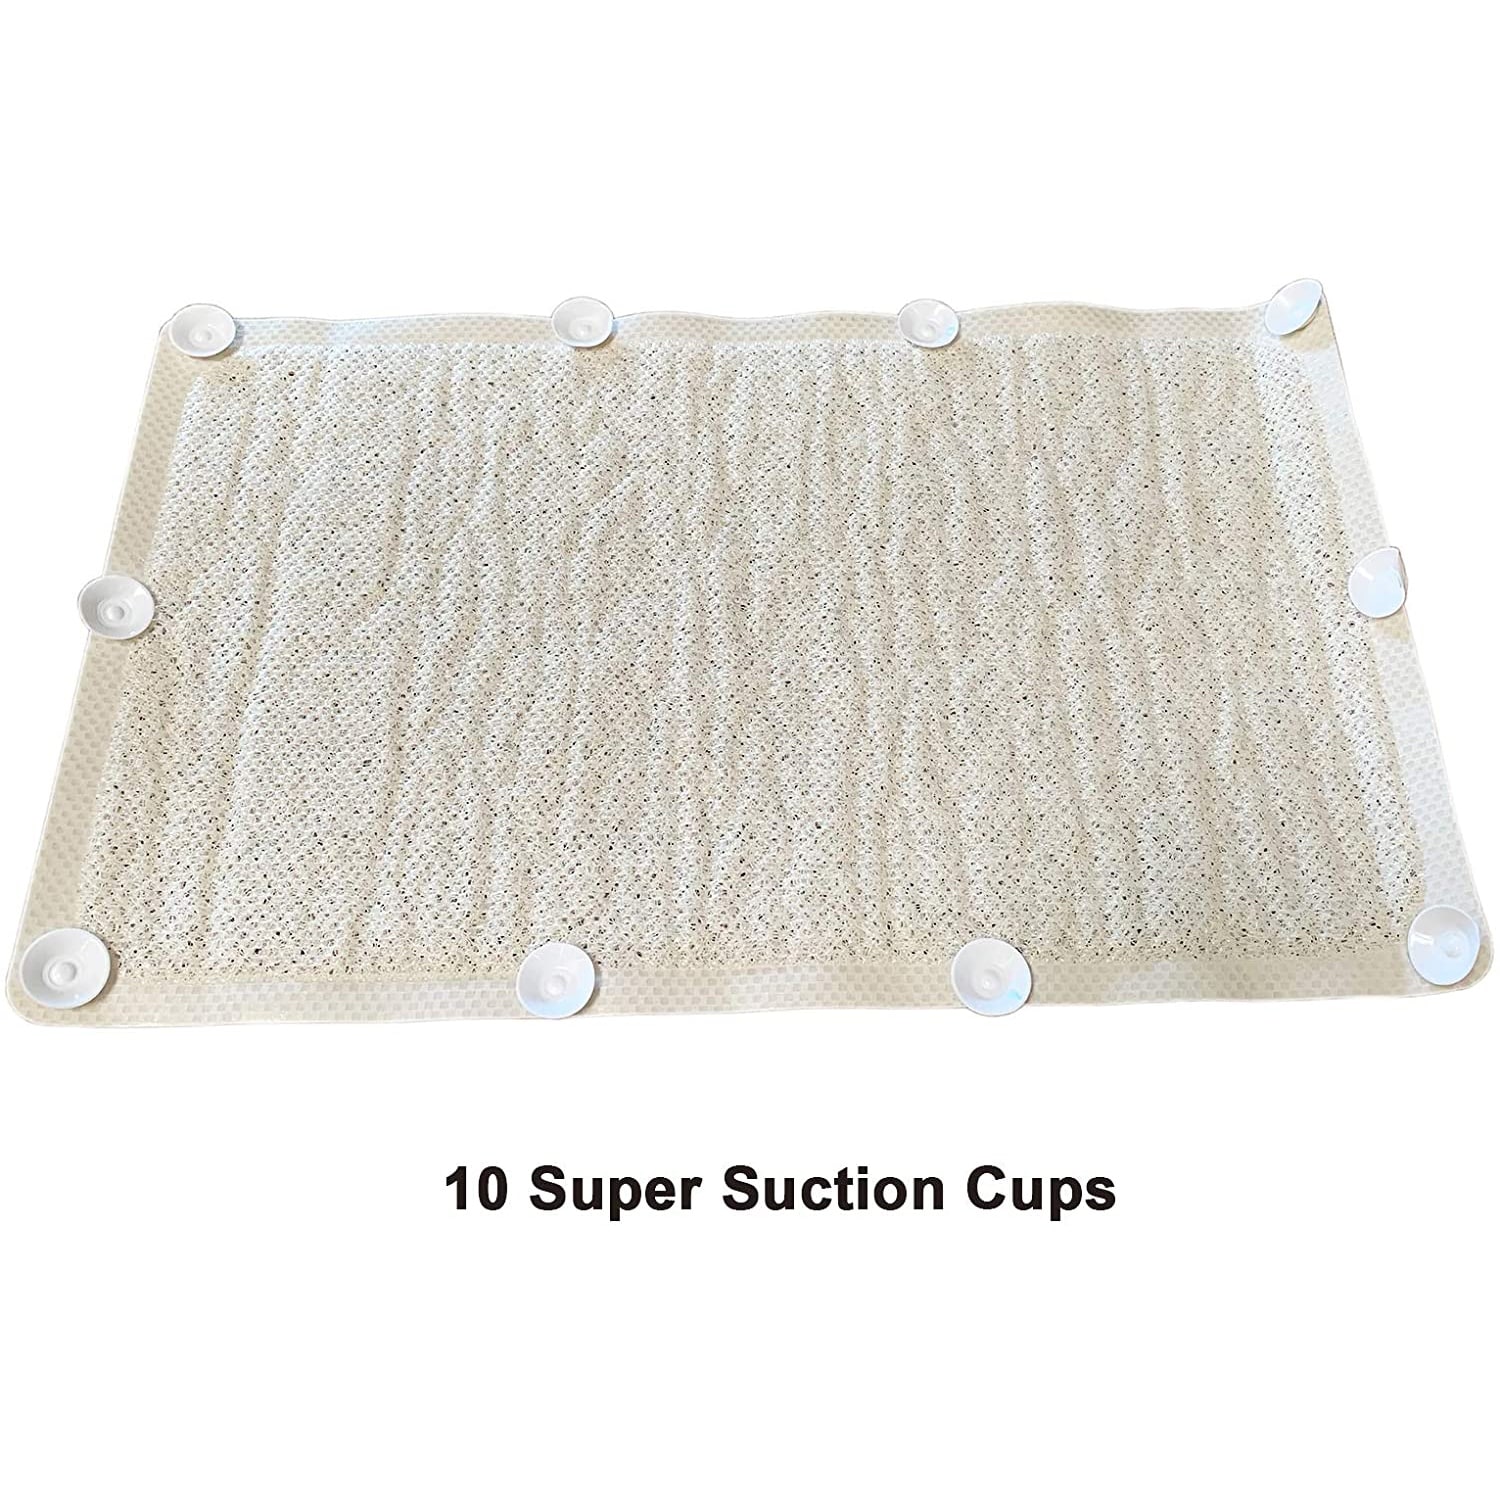 https://ak1.ostkcdn.com/images/products/is/images/direct/b61b1b94cdcd4f4b3f4054892faa55652f547b7d/HUJI-Slip-Resistant-Loofah-Shower-Mat.jpg